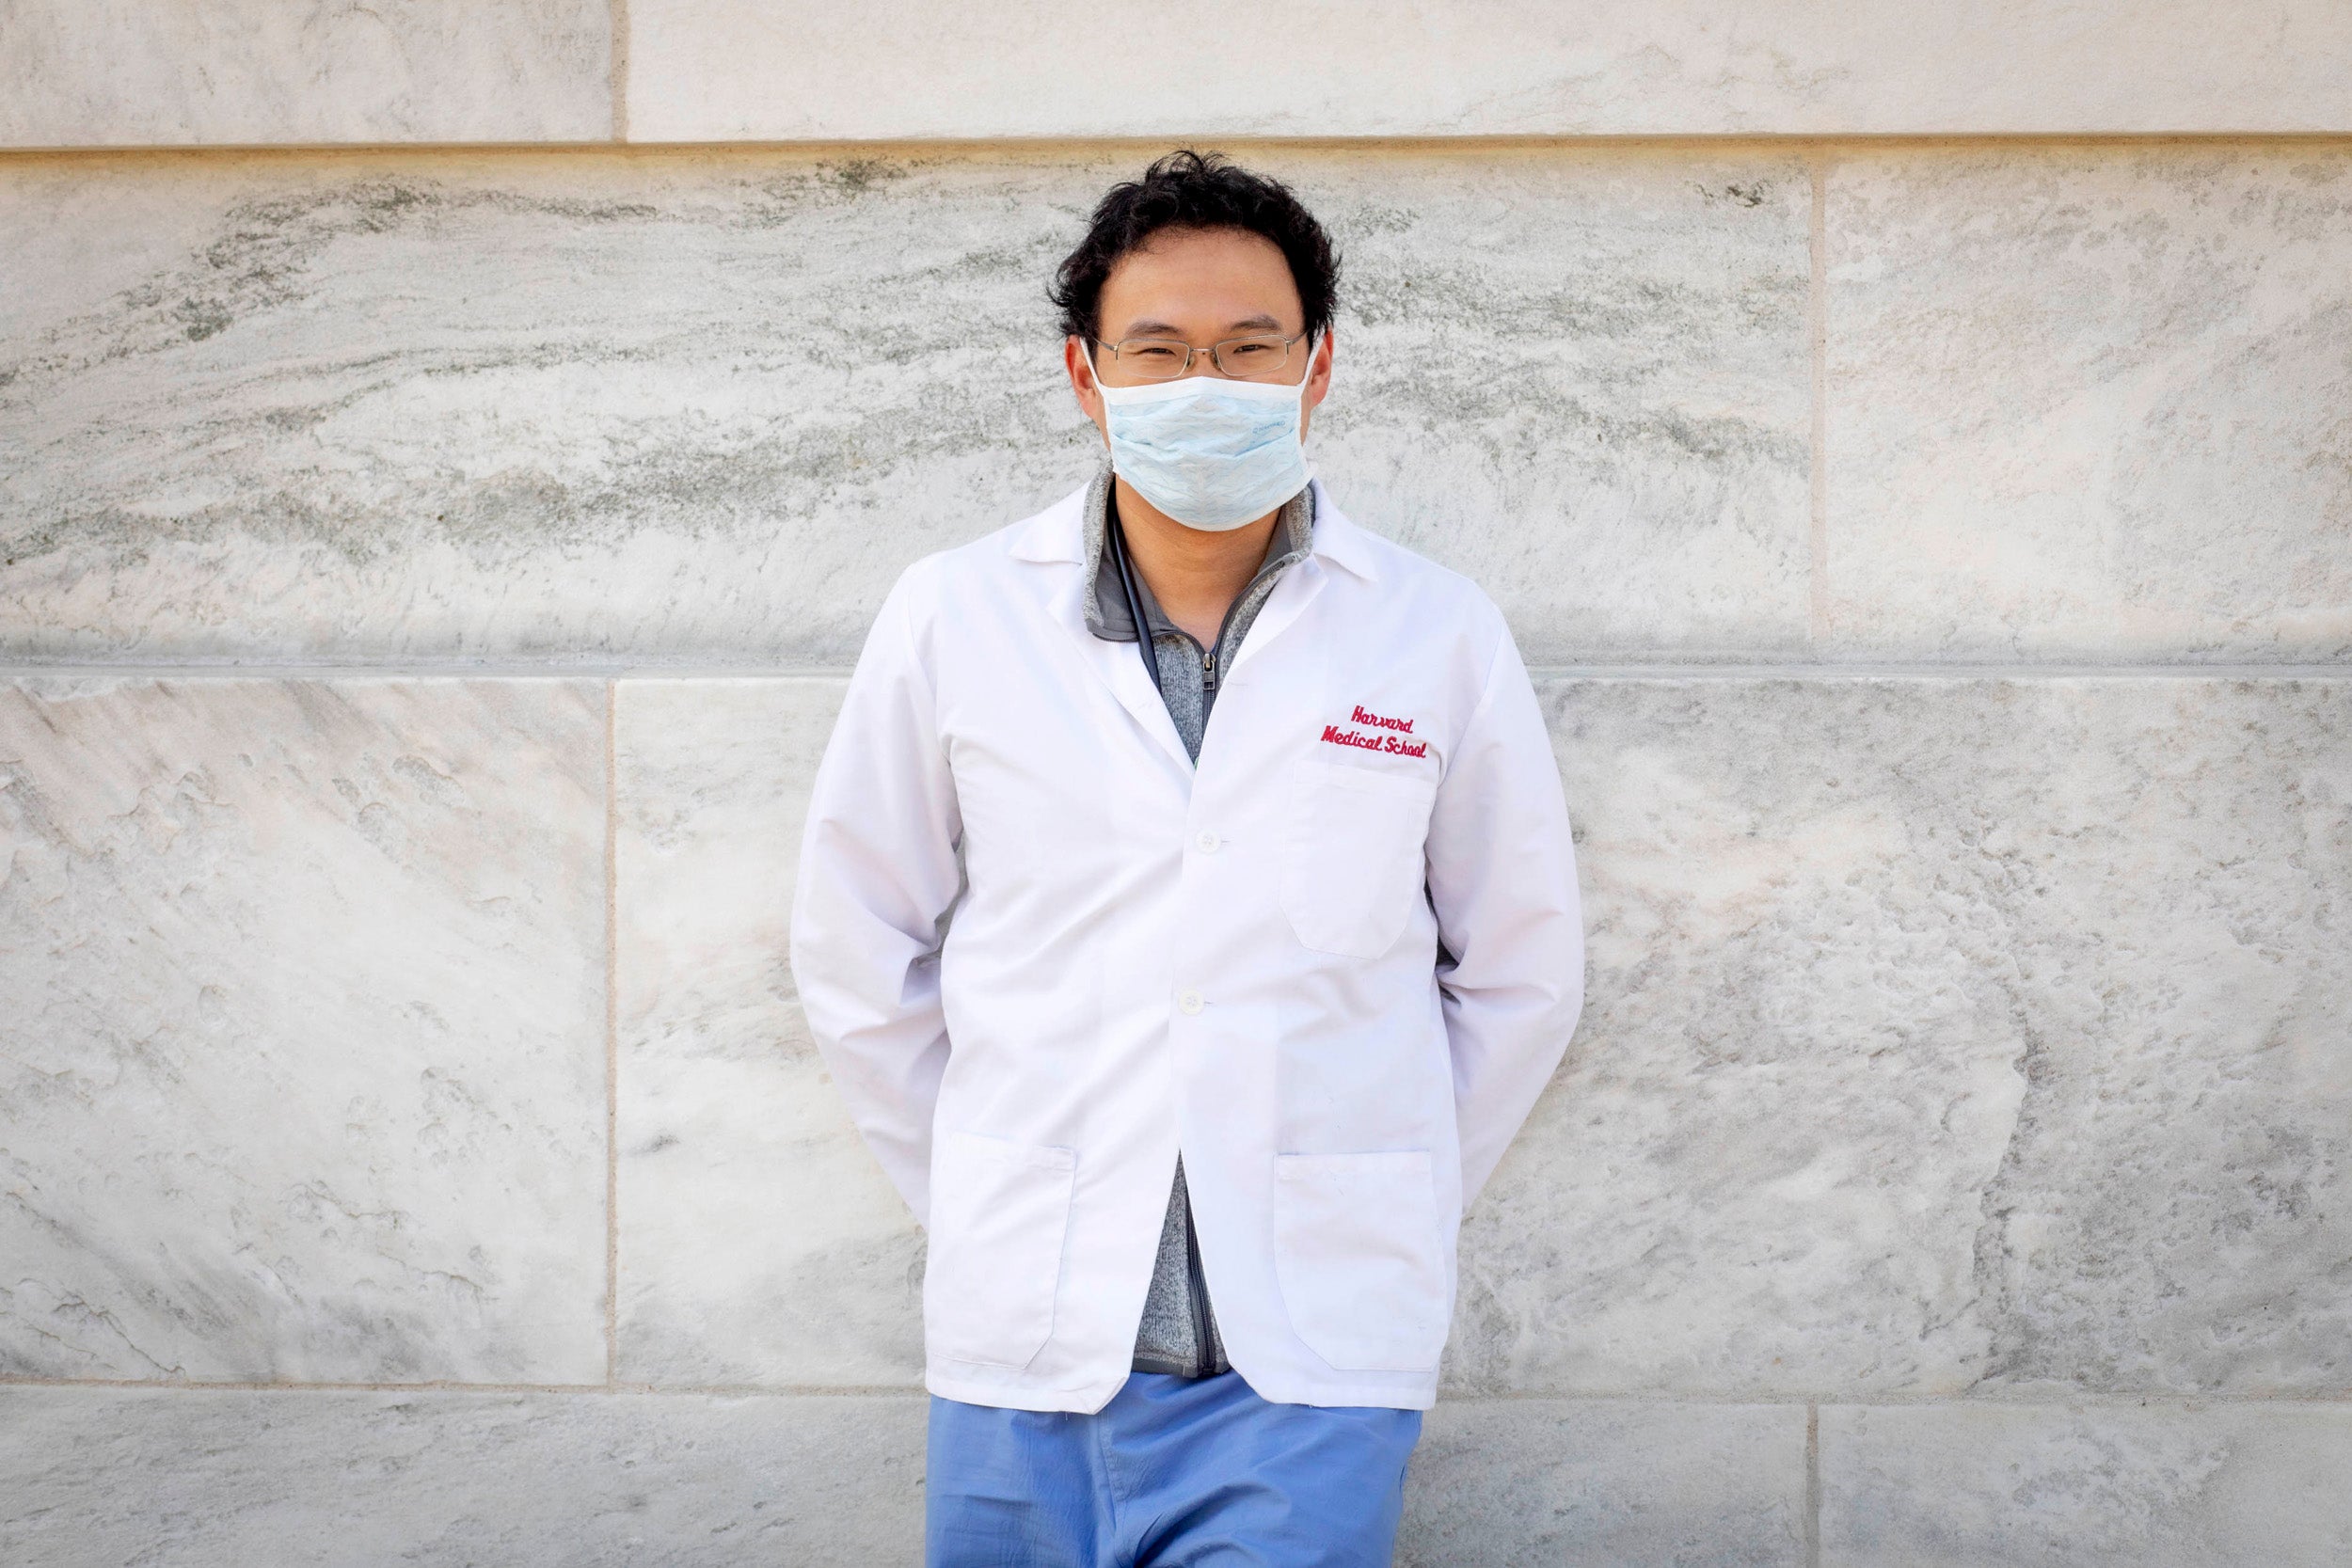 Harvard University Medical School student Fang Cao is pictured.